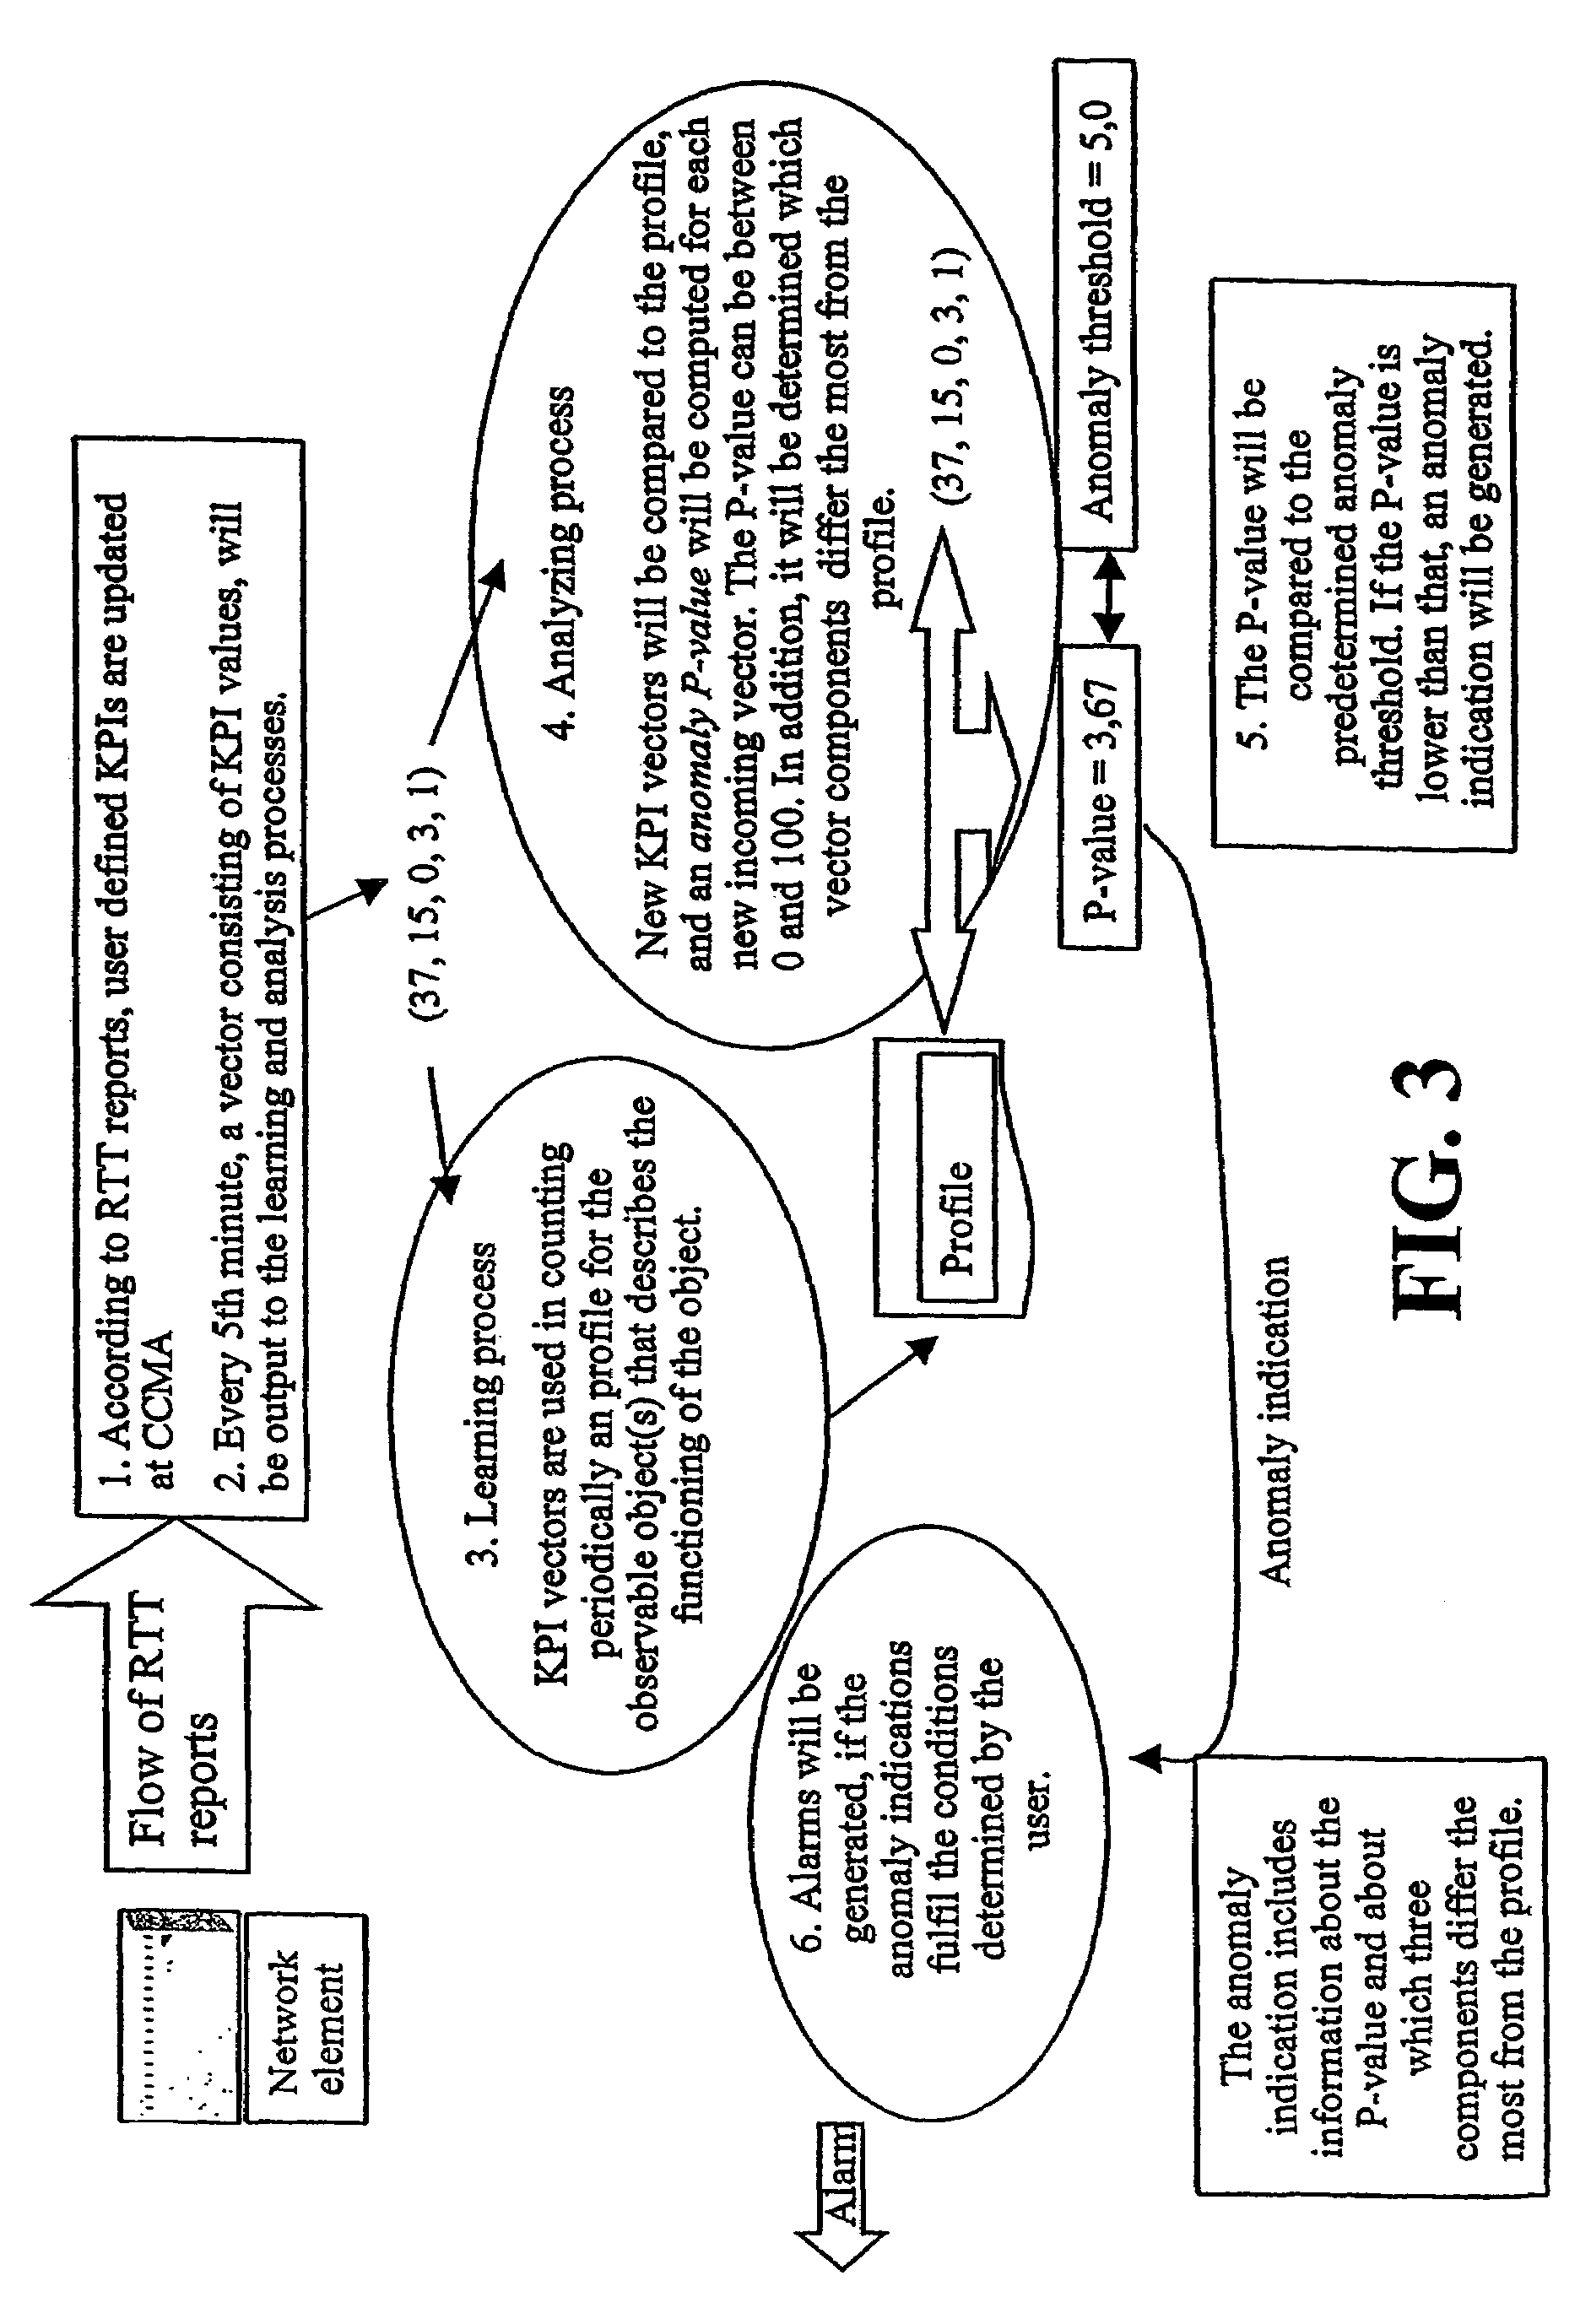 System, device and method for automatic anomaly detection